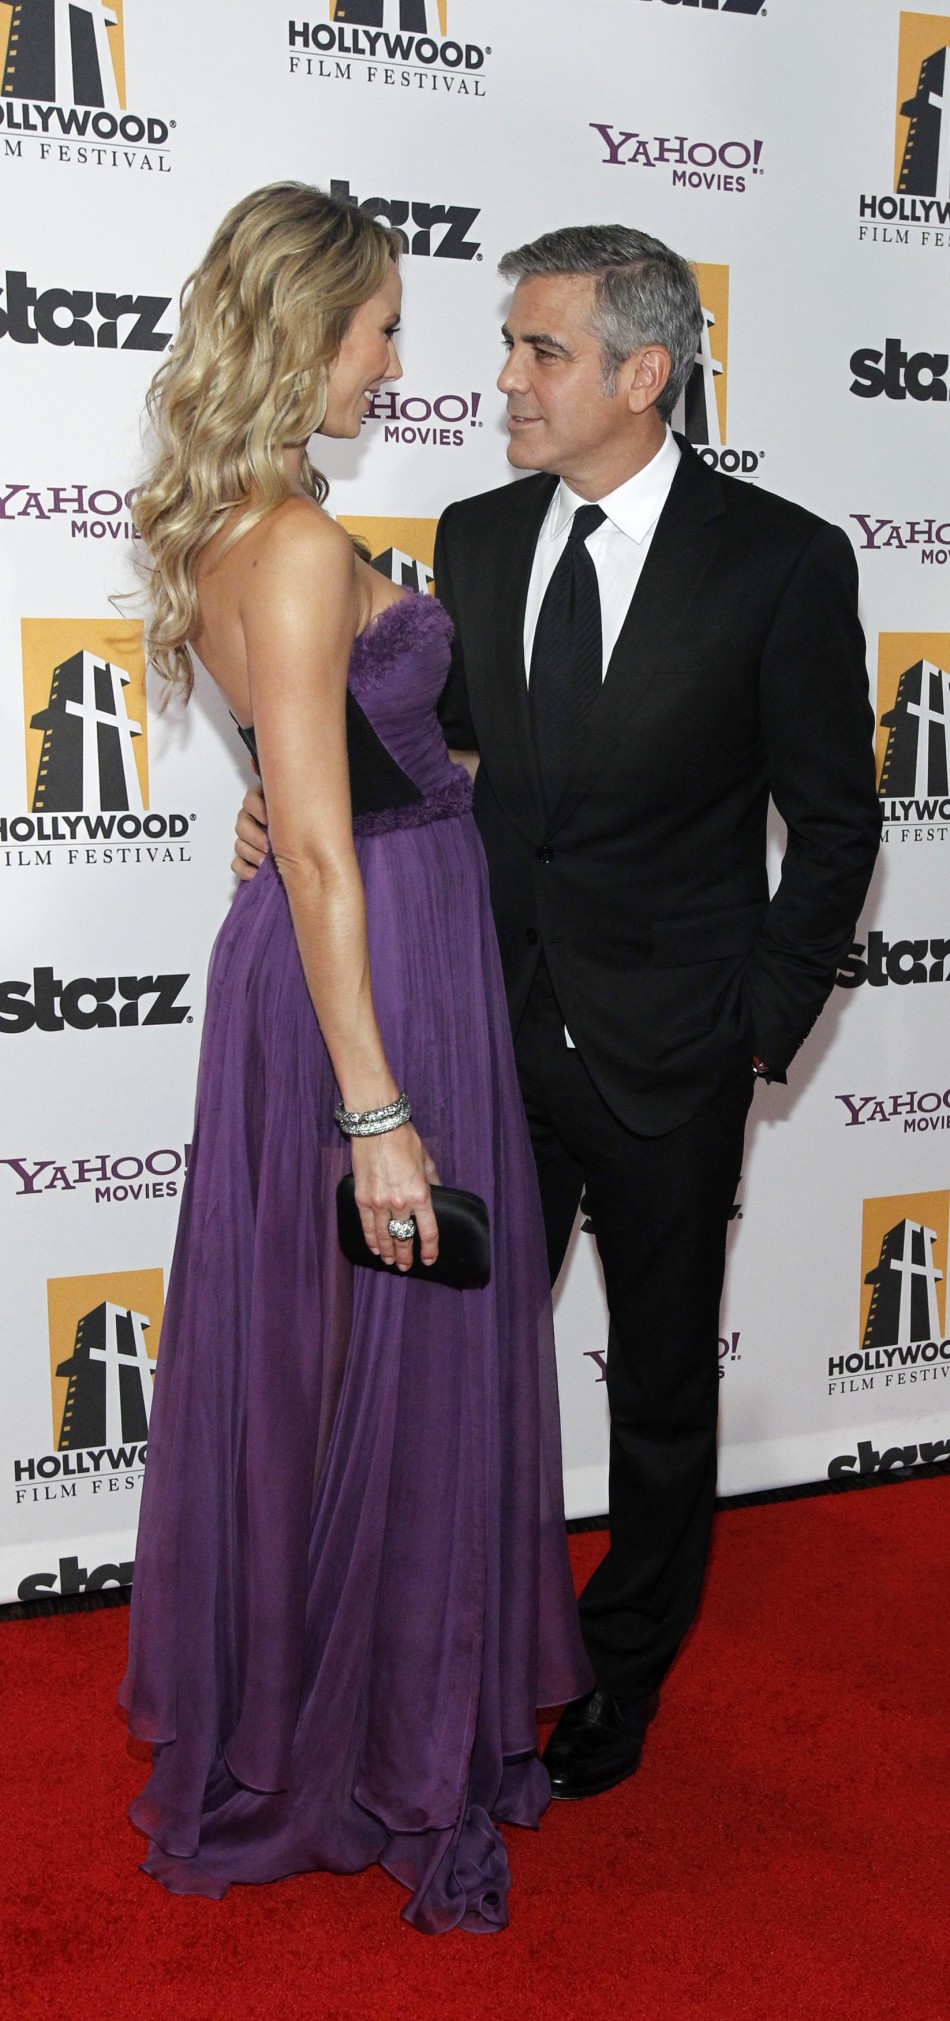 Clooney and Keibler